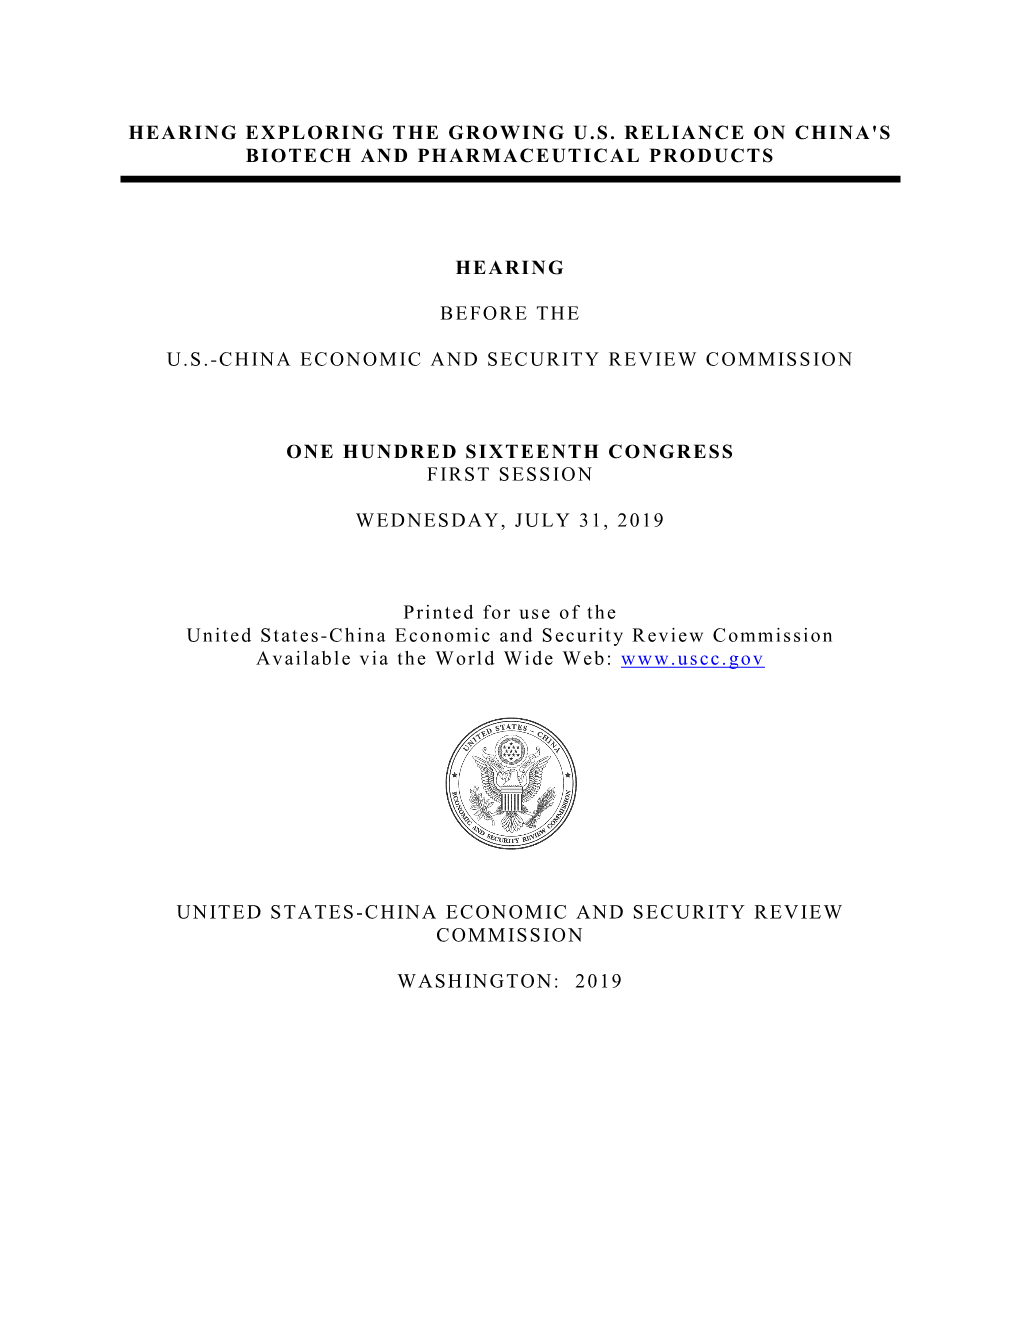 Hearing Exploring the Growing U.S. Reliance on China's Biotech and Pharmaceutical Products Hearing Before the U.S.-China Economi